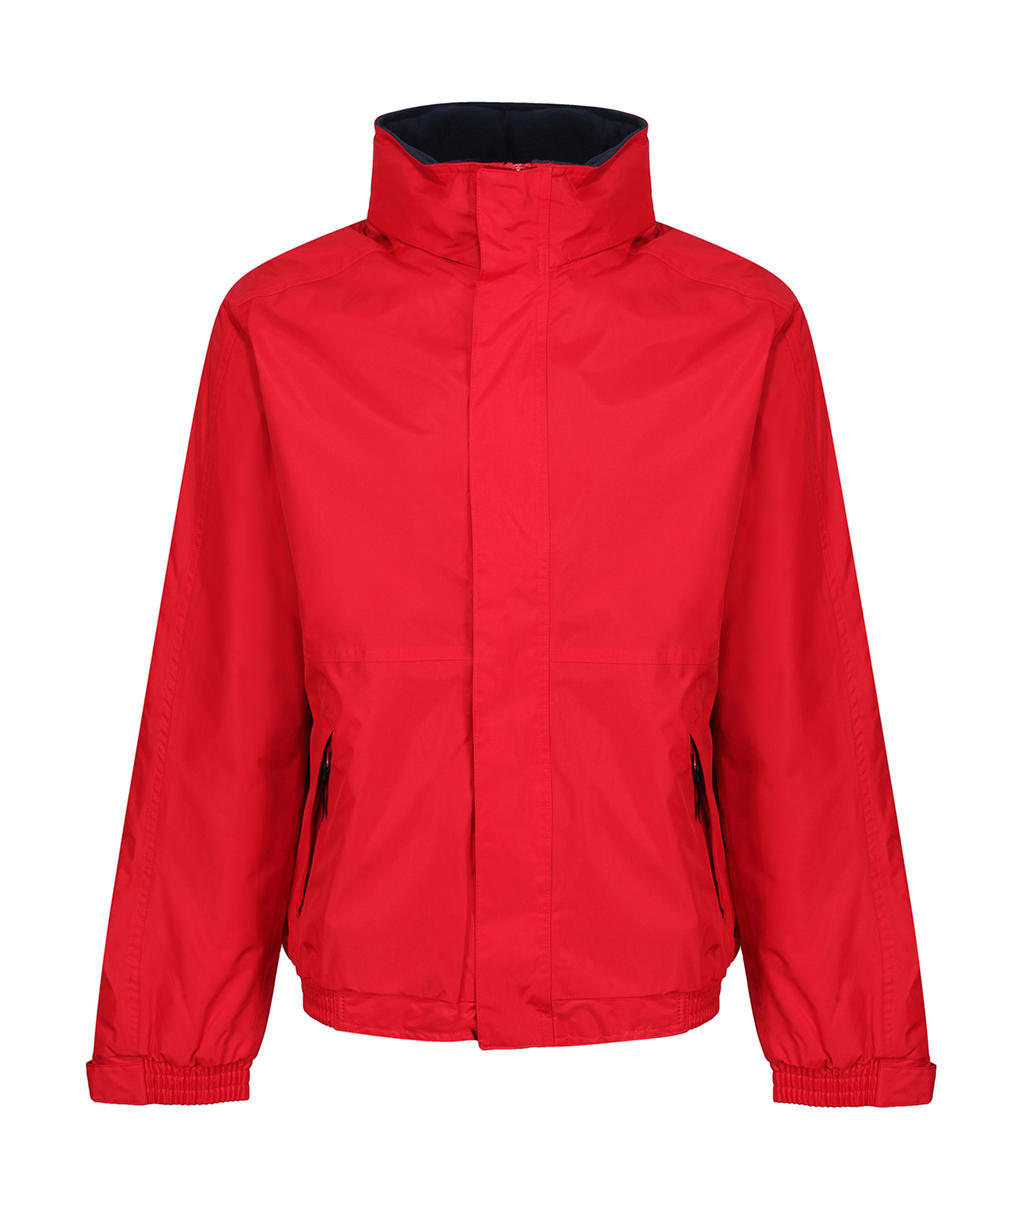  Dover Bomber Jacket in Farbe Classic Red/Navy